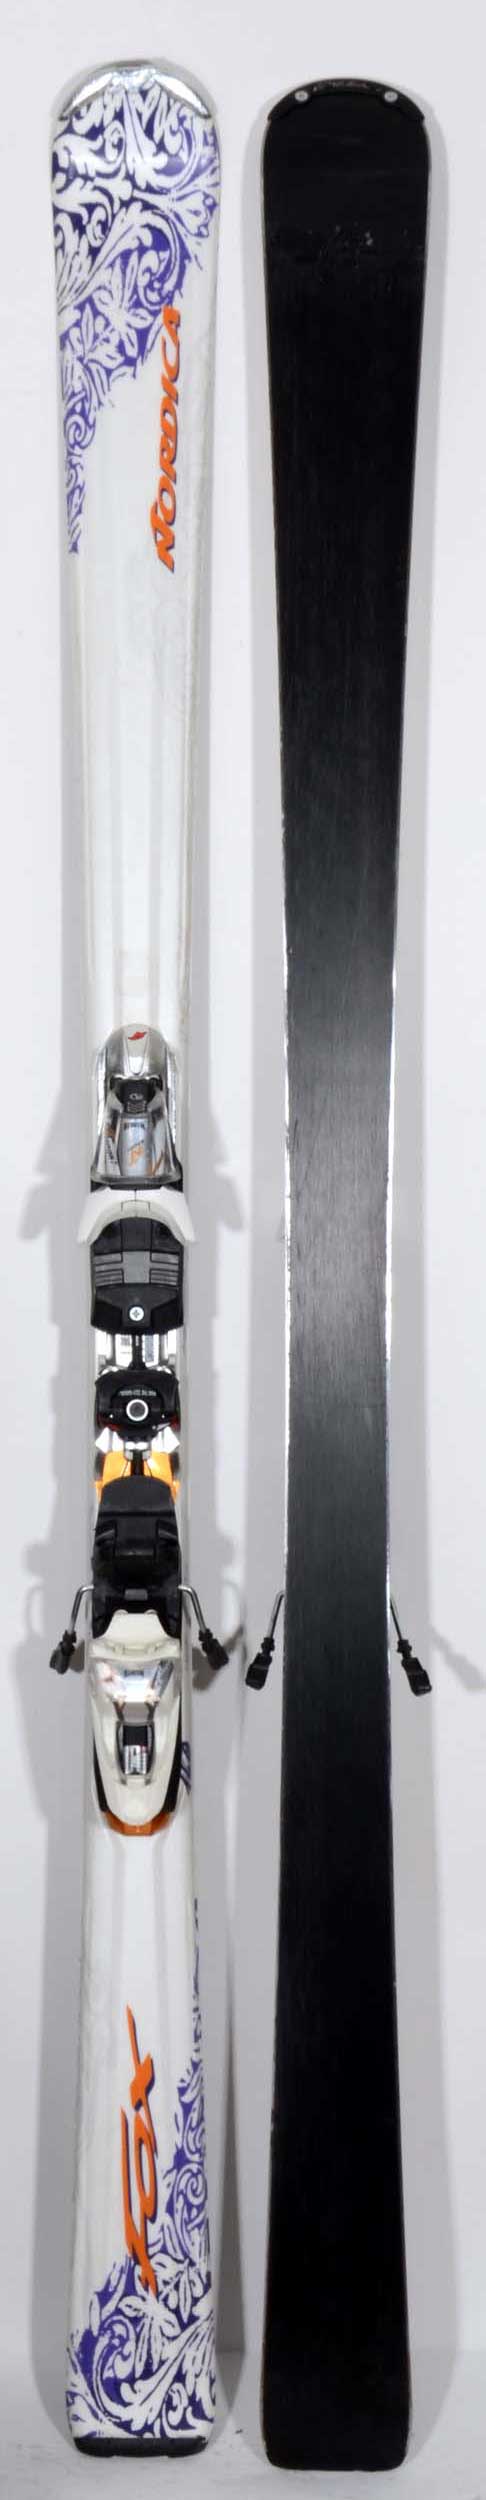 Nordica Fox - skis Femme d'occasion